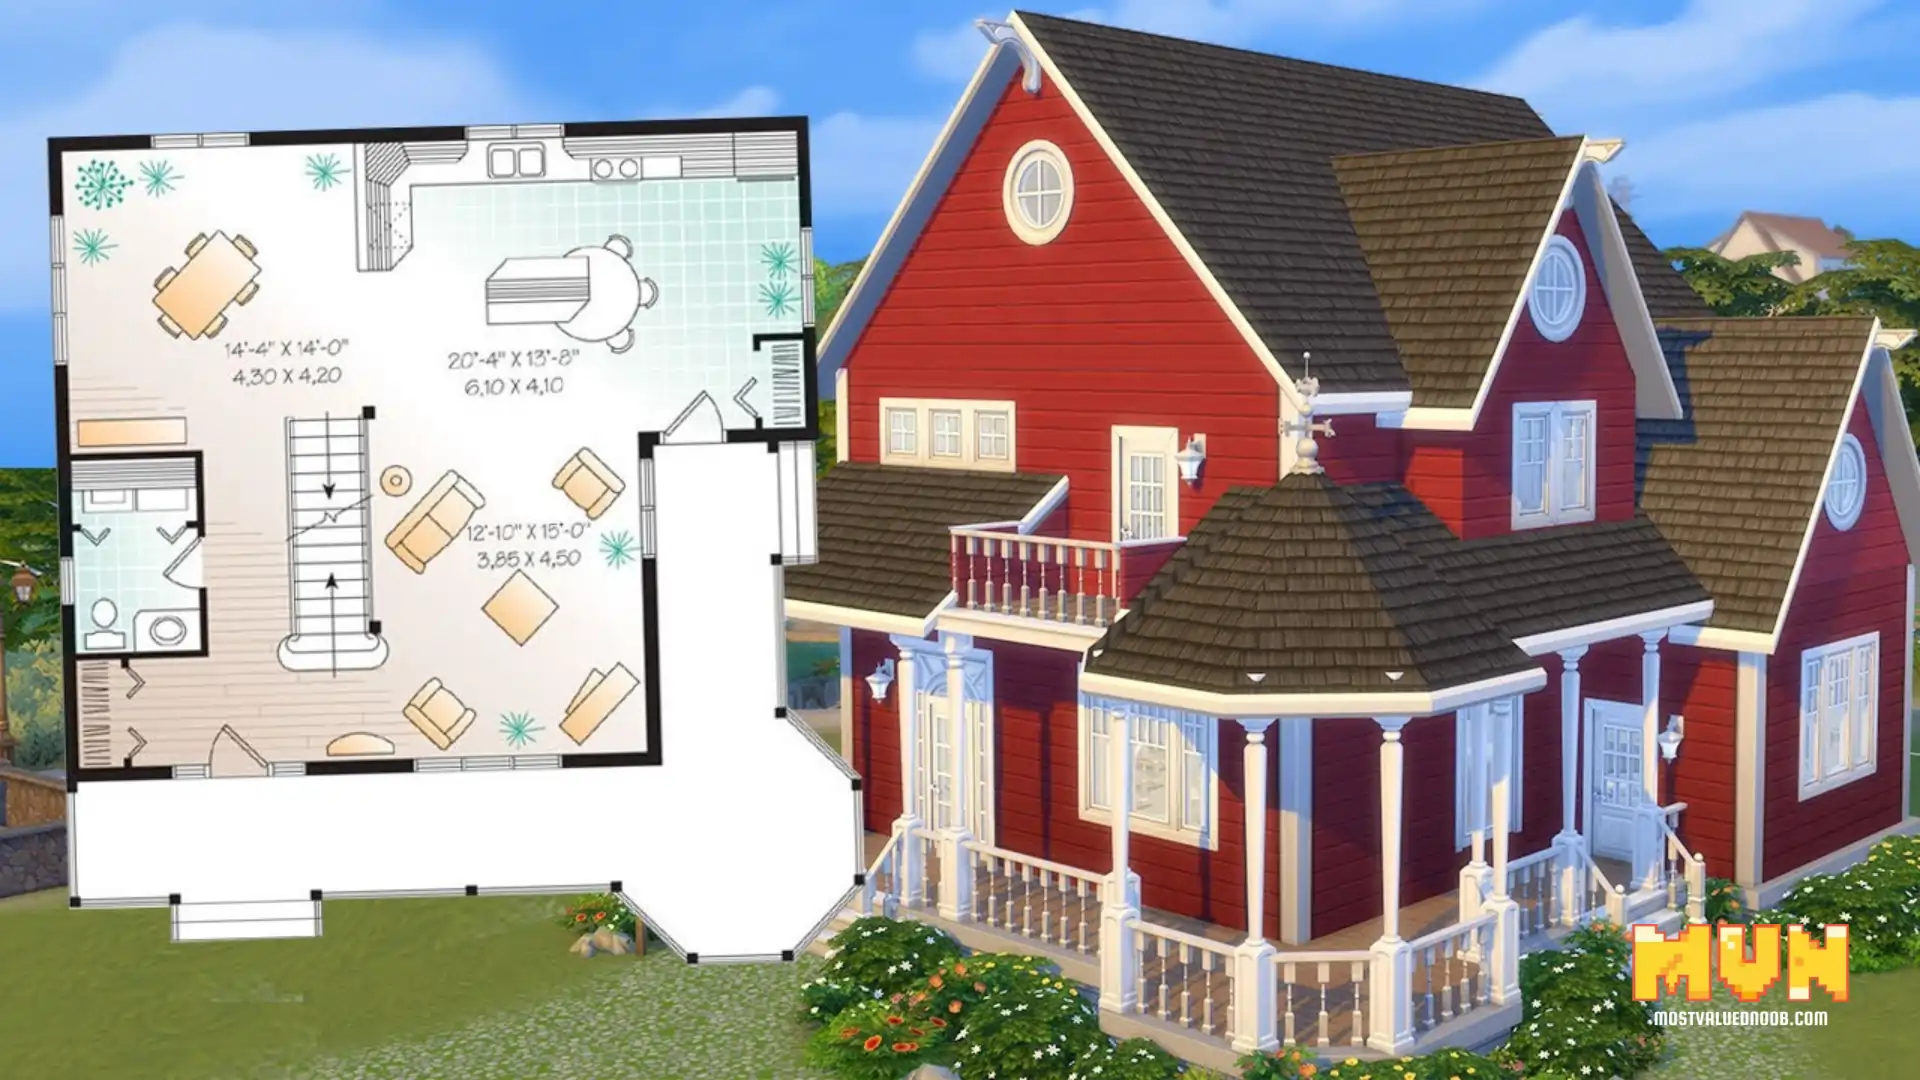 Try Building a House from a Real Floor Plan